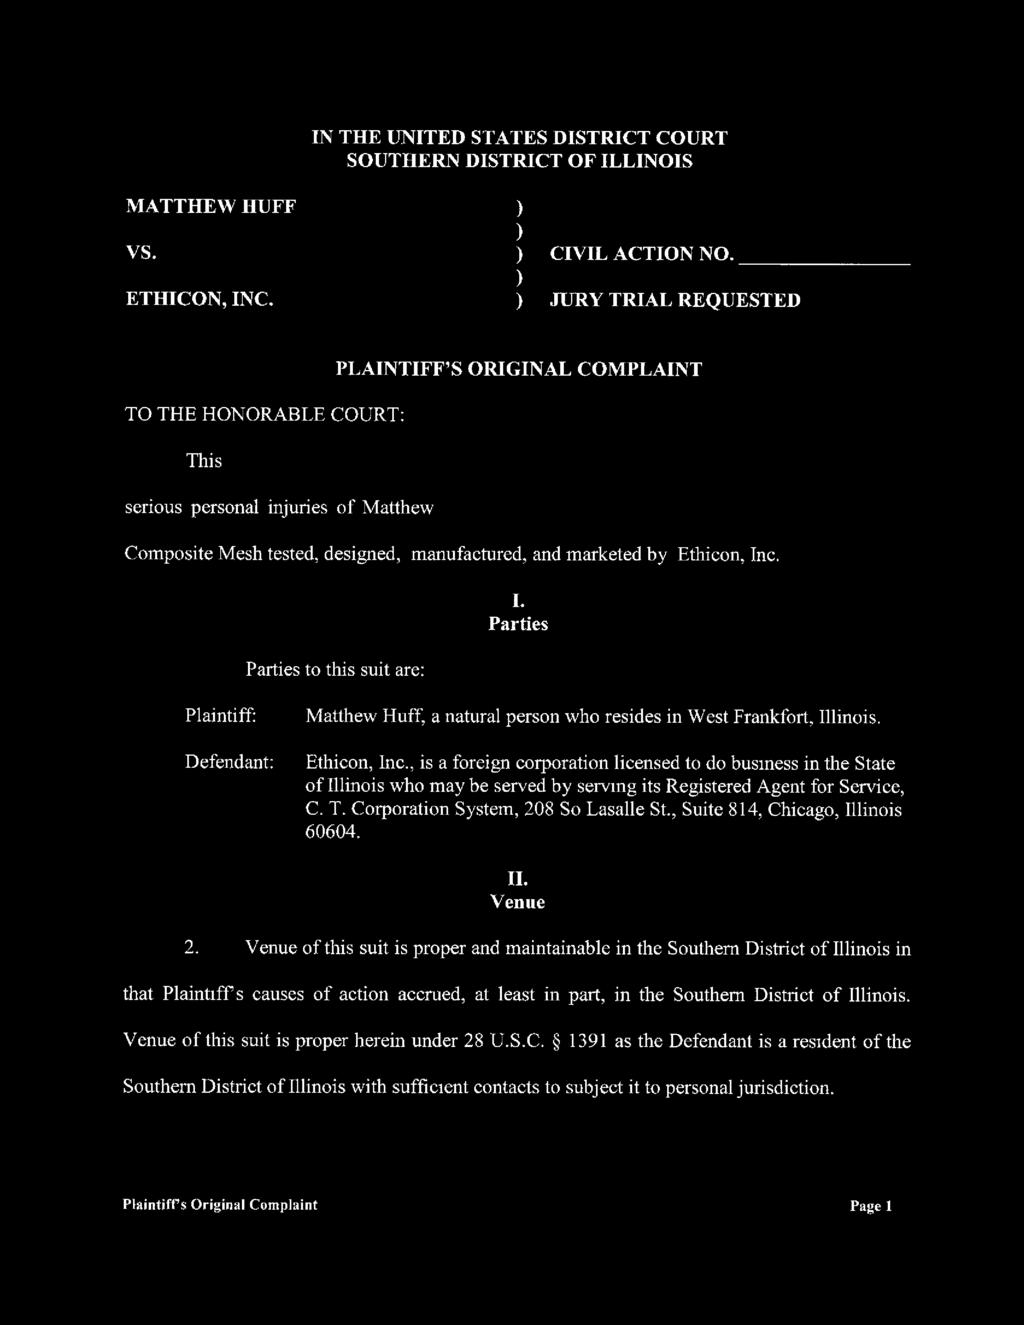 Case 3:16-cv-00368-JPG-PMF Document 1 Filed 04/01/16 Page 1 of 7 Page ID #1 MATTHEW HUFF vs. IN THE UNITED STATES DISTRICT COURT SOUTHERN DISTRICT OF ILLINOIS ) ) ) CIVIL ACTION NO. ETHICON,, INC.